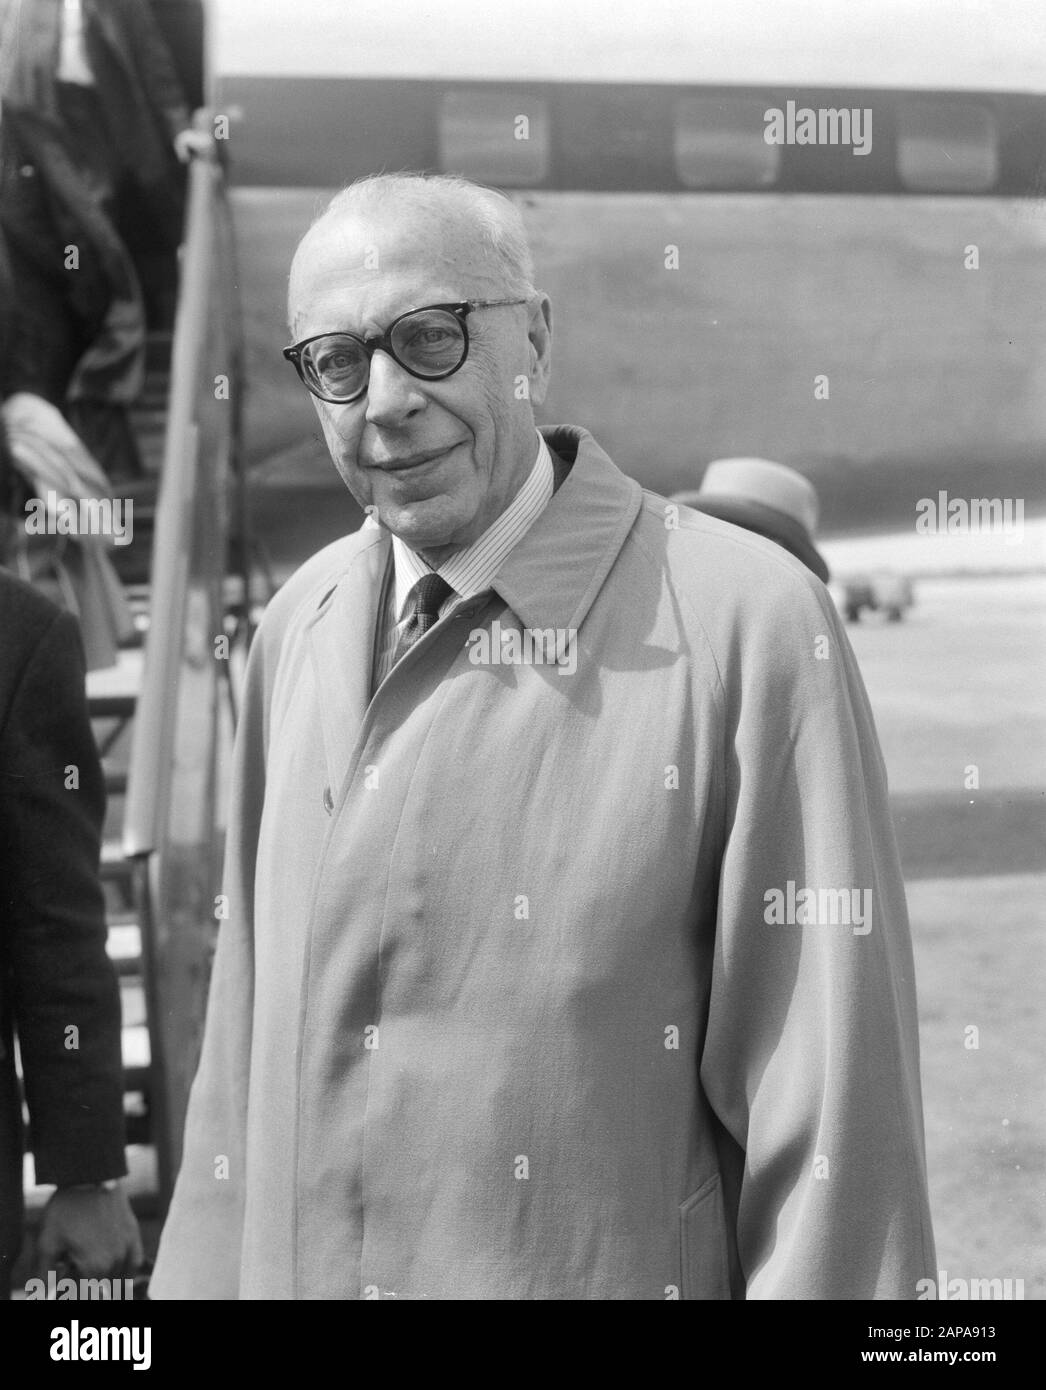 Arrival Cleveland Symphonie Orchestra, George Szell (head) Date: 23 June 1965 Keywords: HEADS, arrivals, orchestras Personal name: George Szell Stock Photo